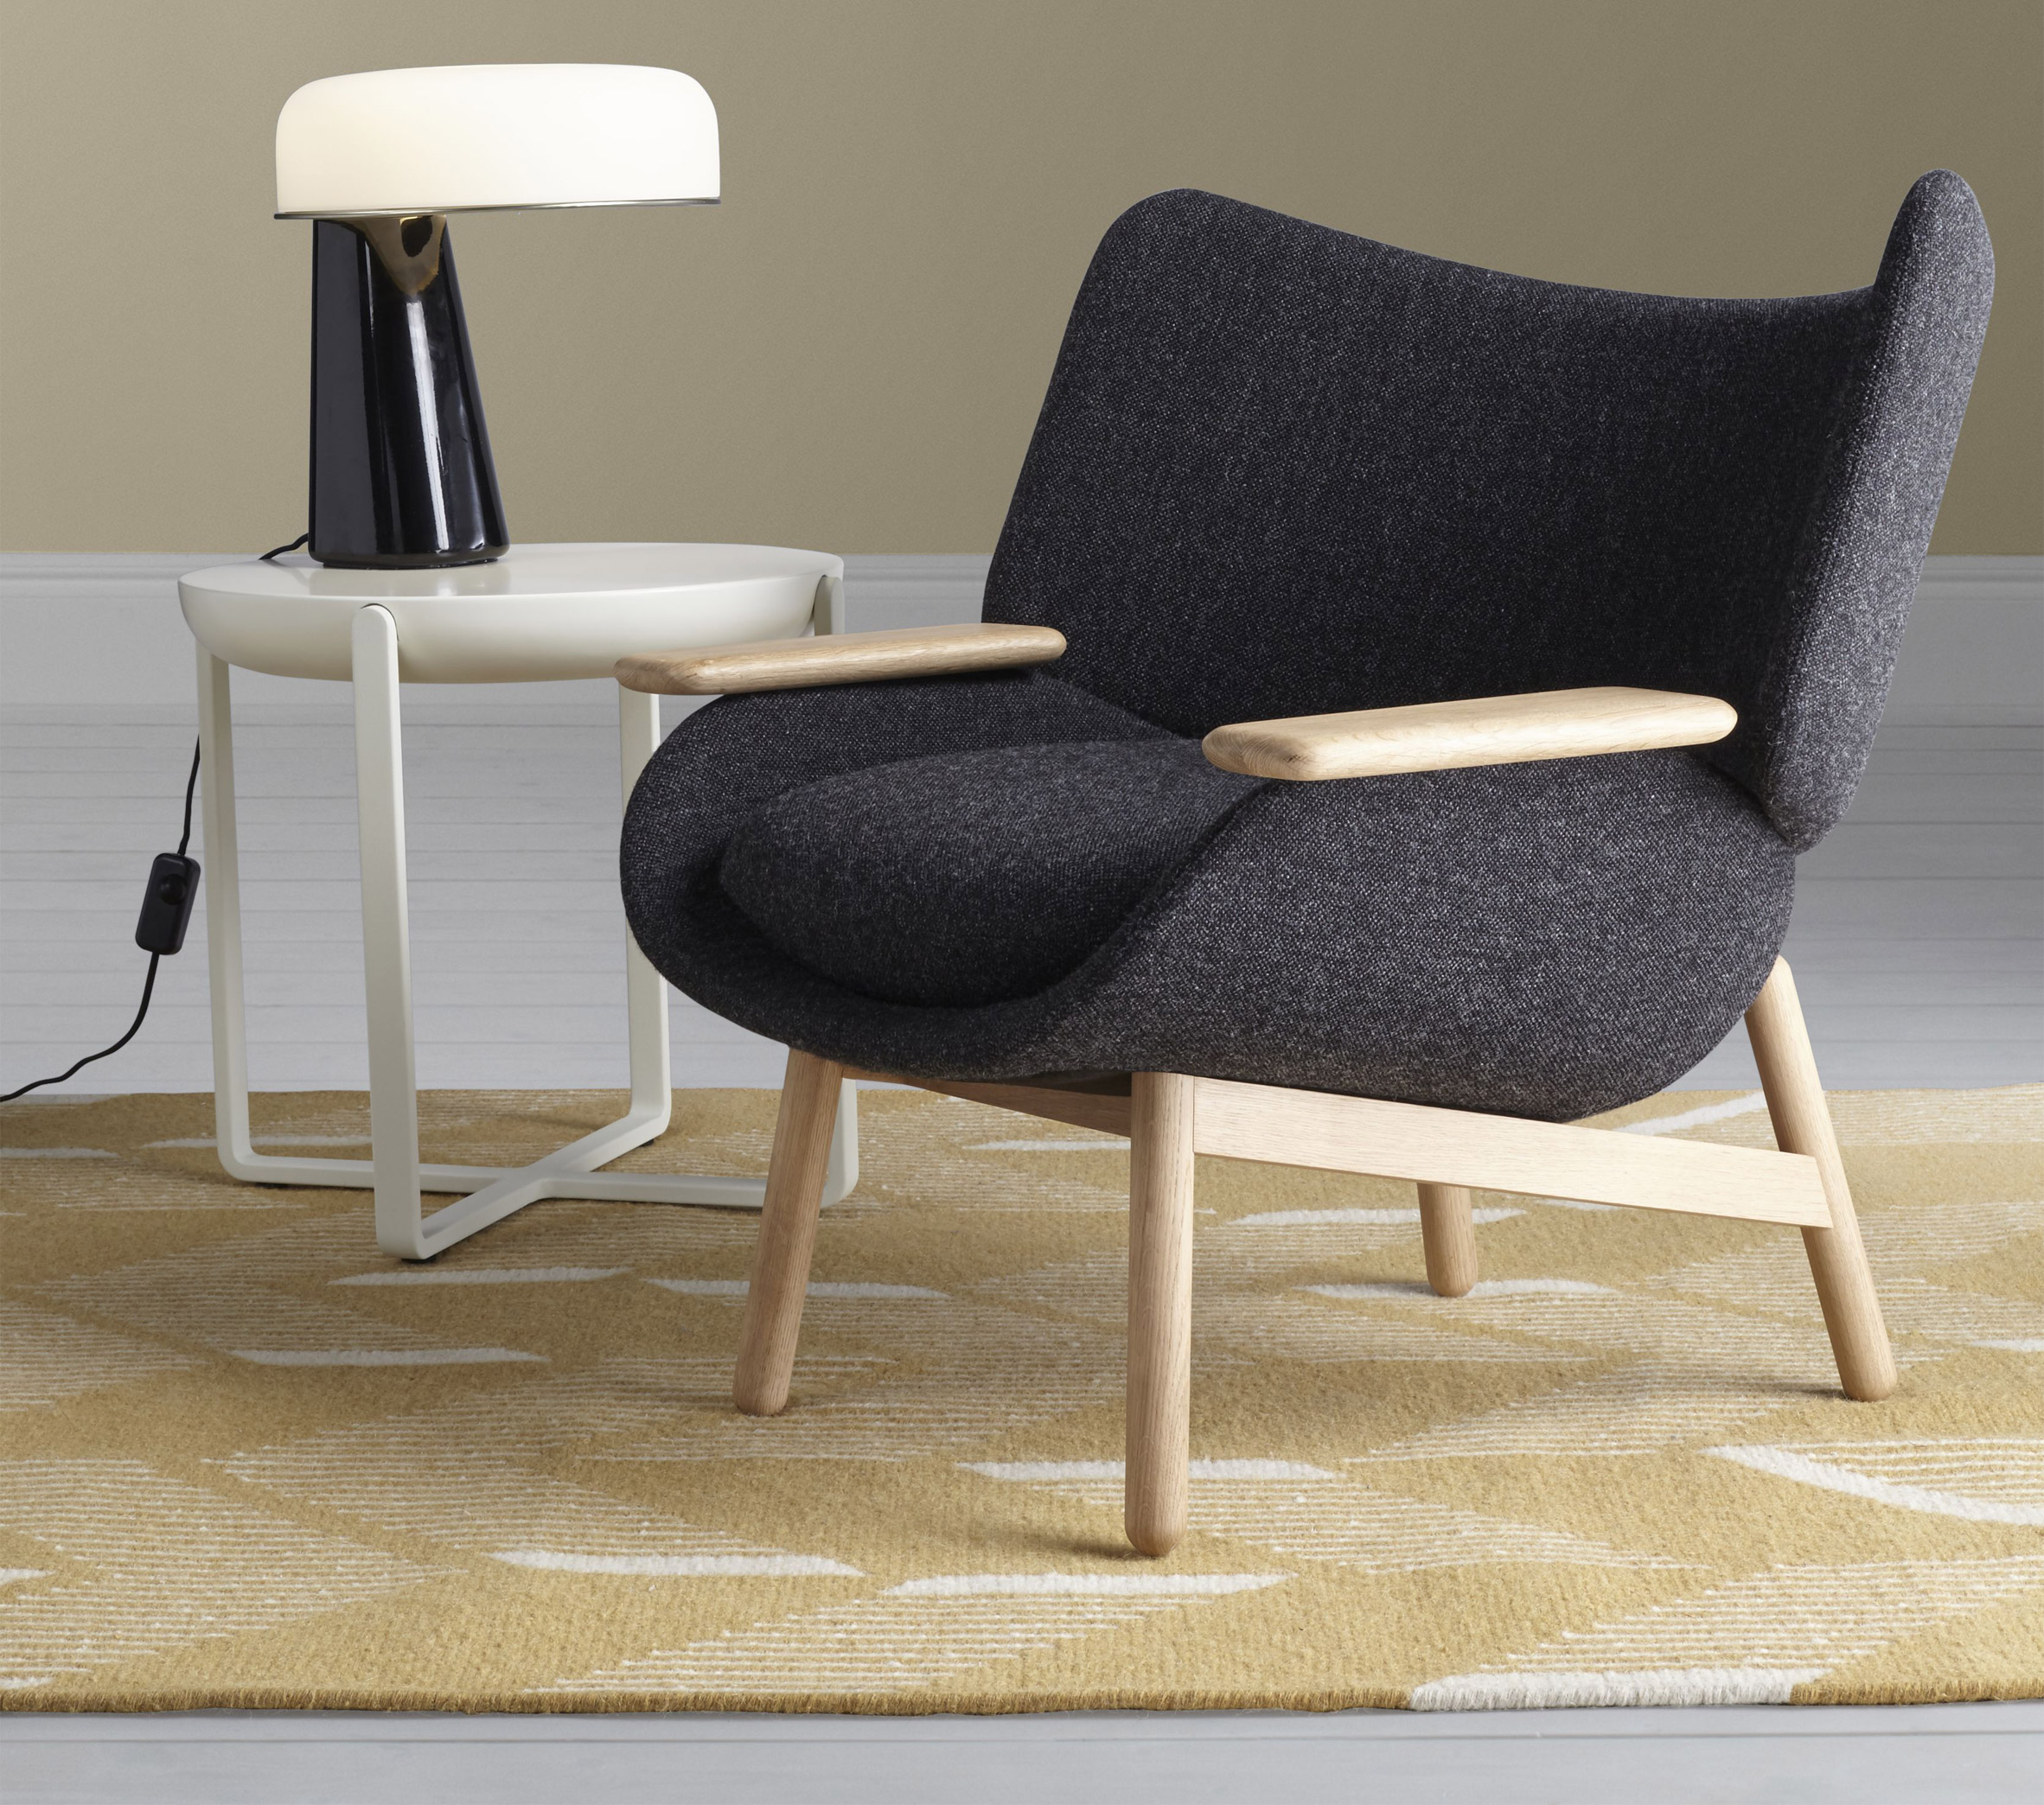 Doshi Levien furniture collection for John Lewis